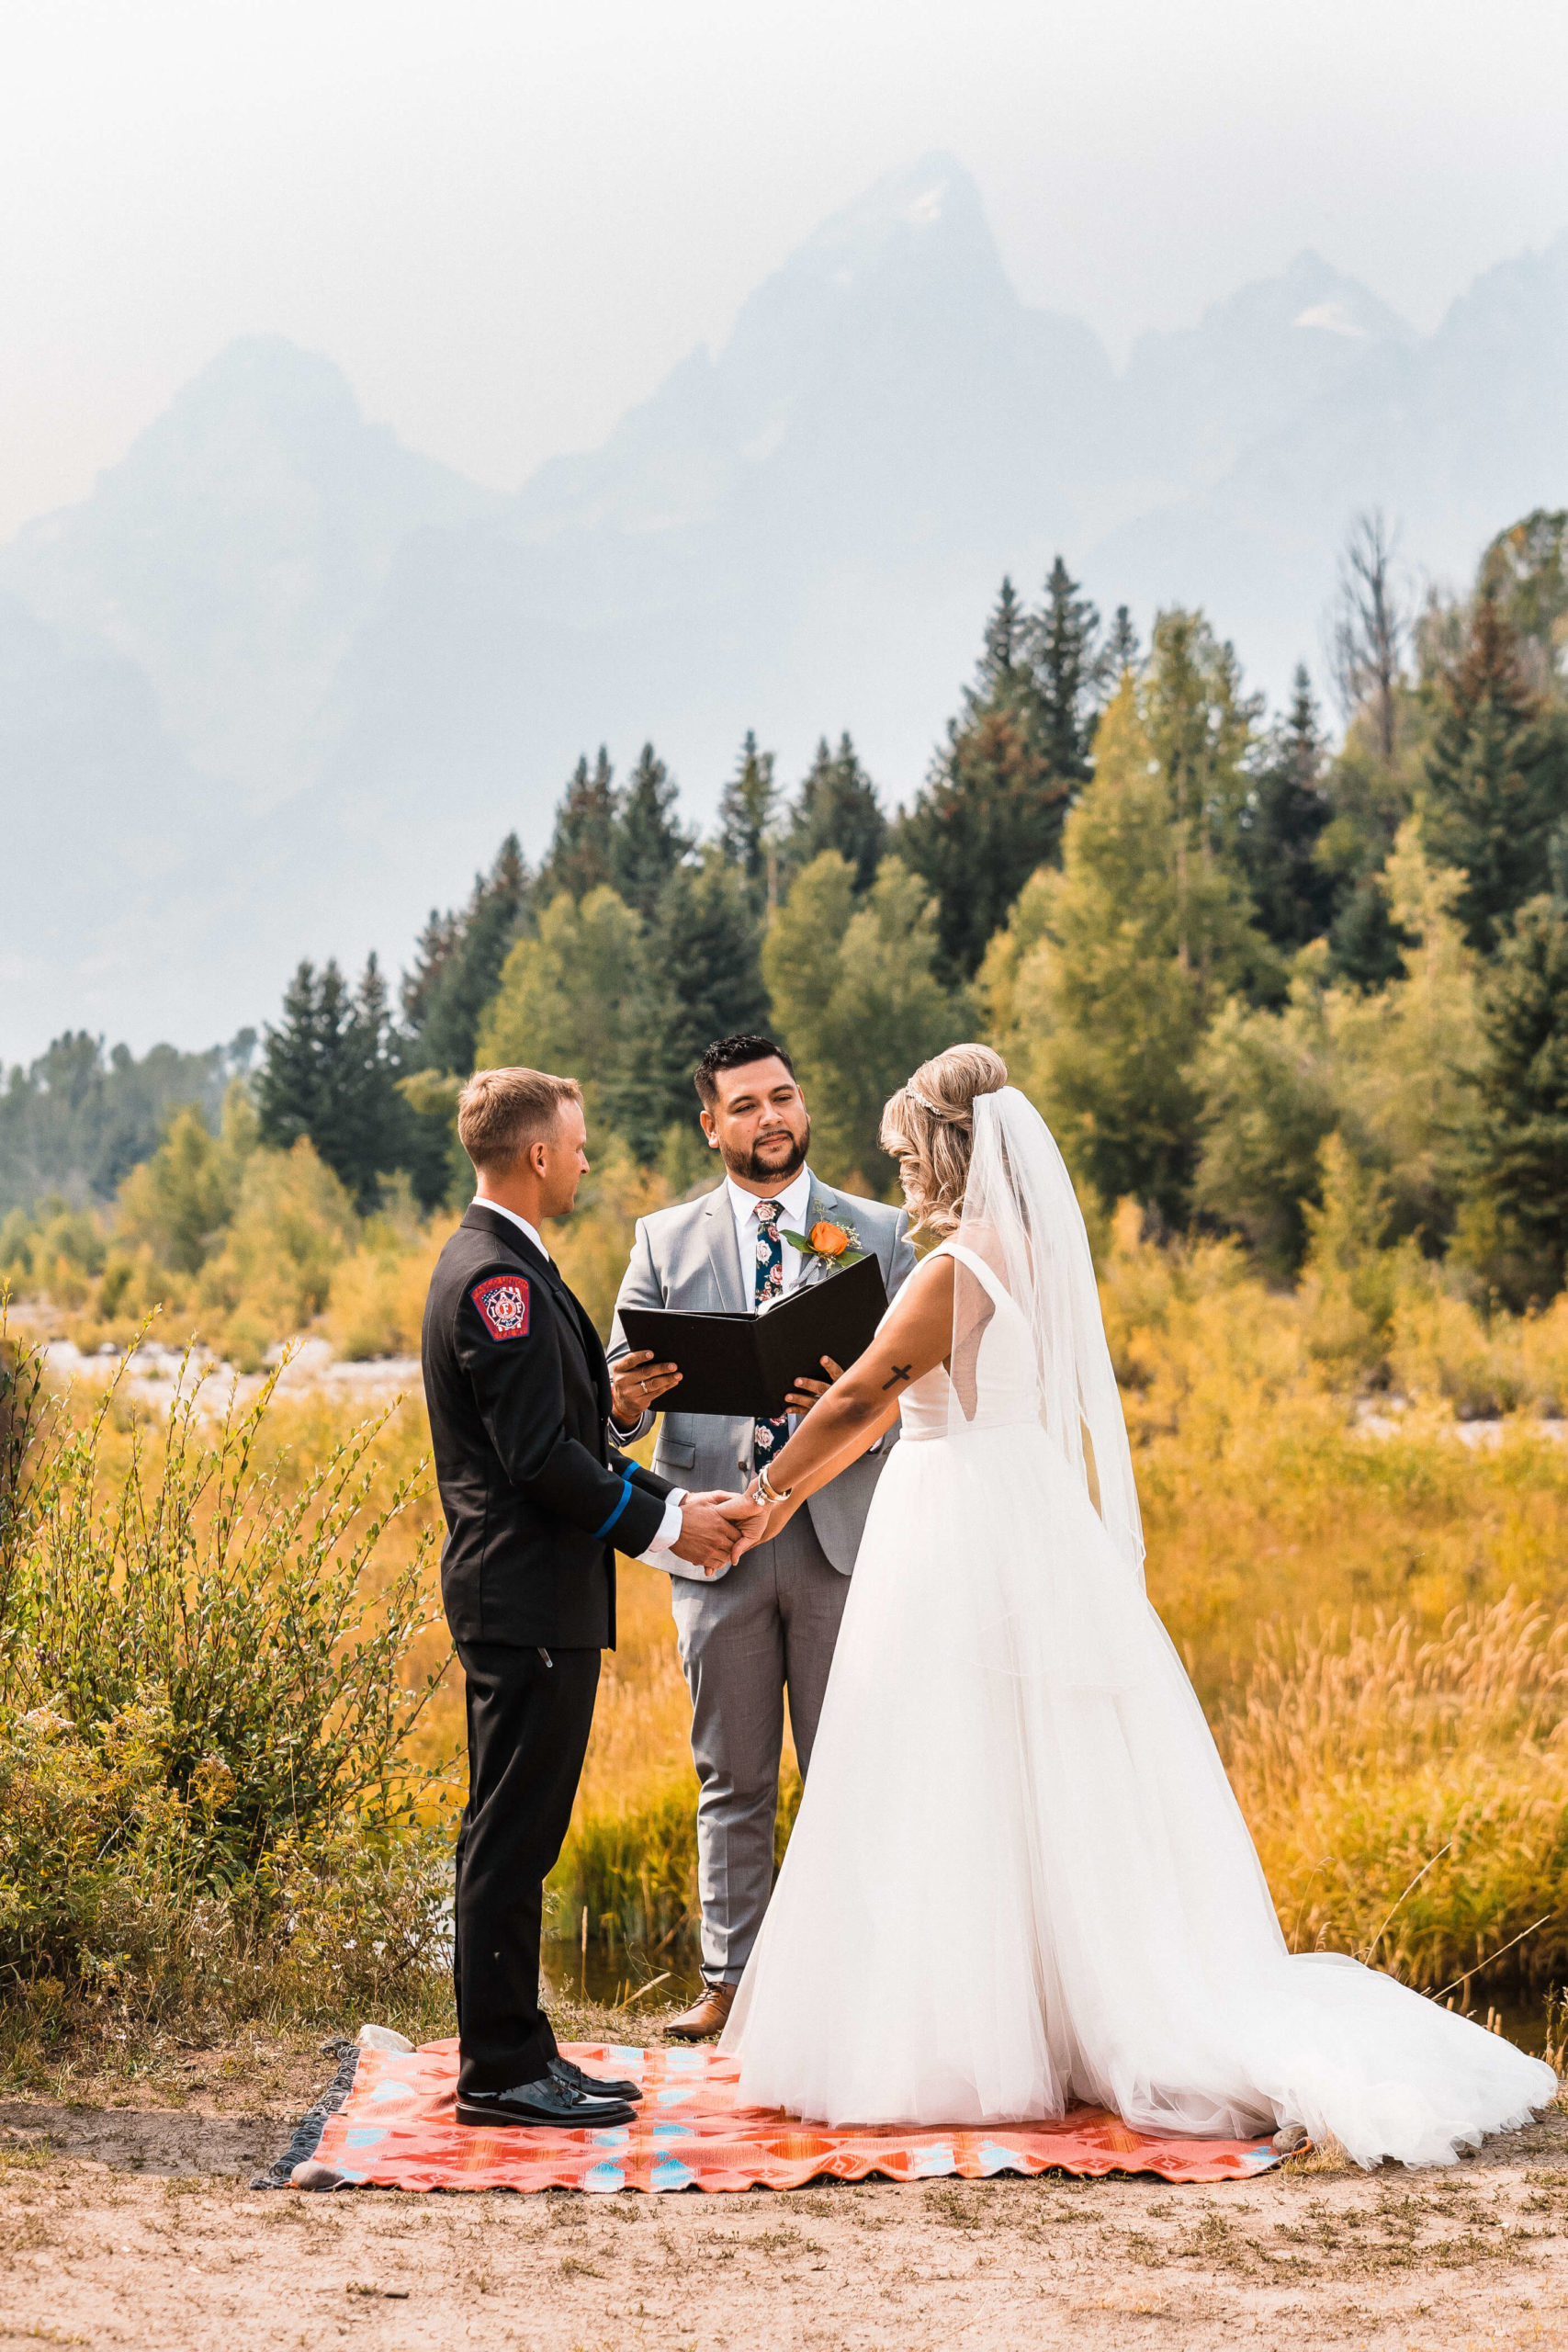 Bride and groom exchanging vows at their elopement location in Washington